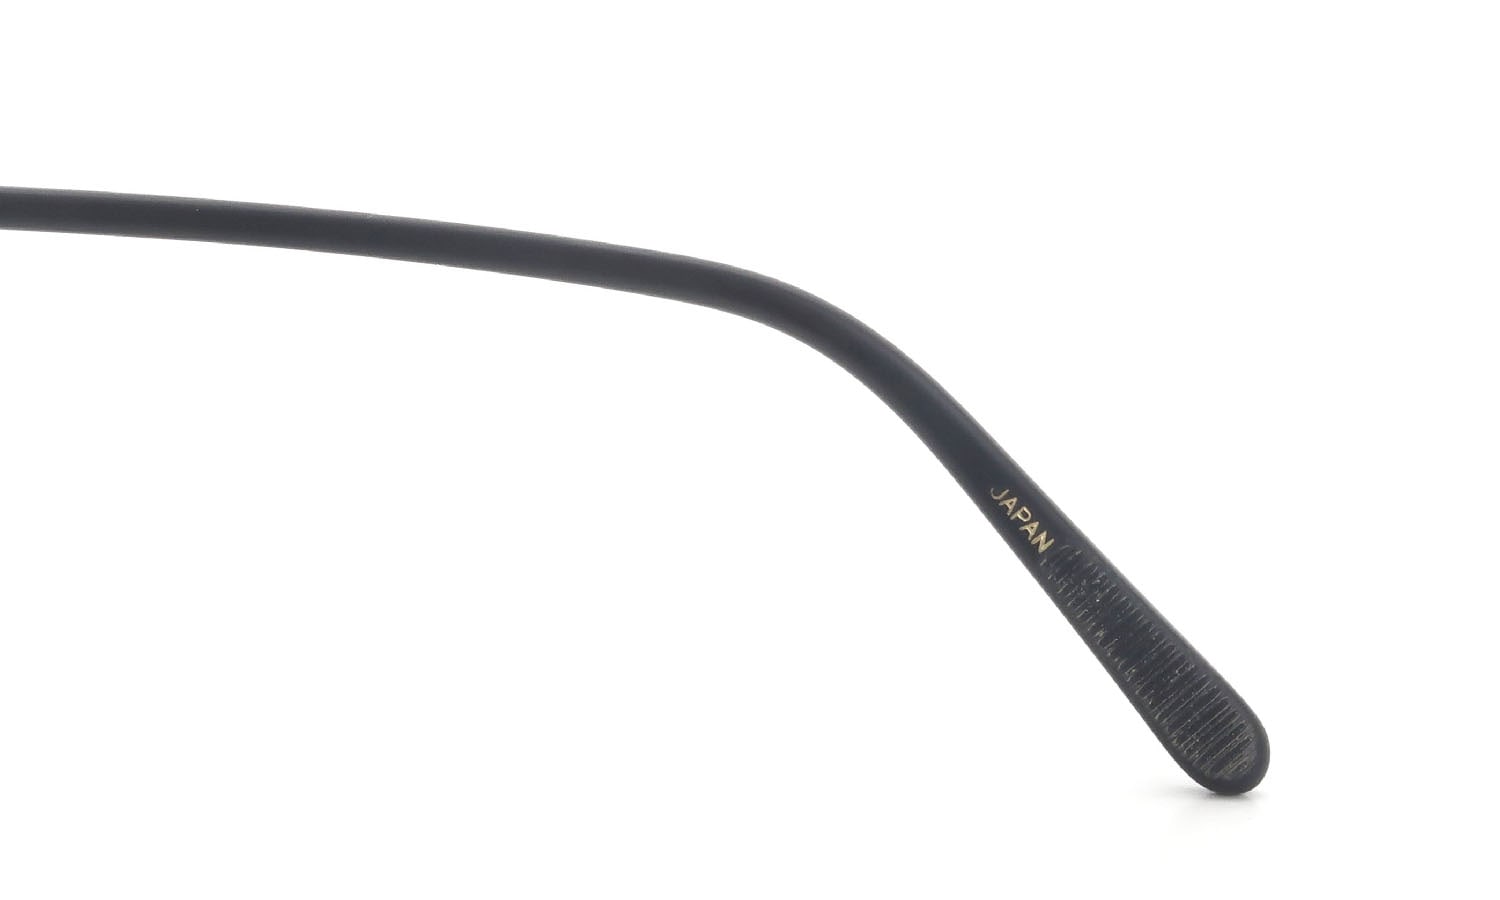 OLIVER PEOPLES 1990s O'MALLEY 43 BLK